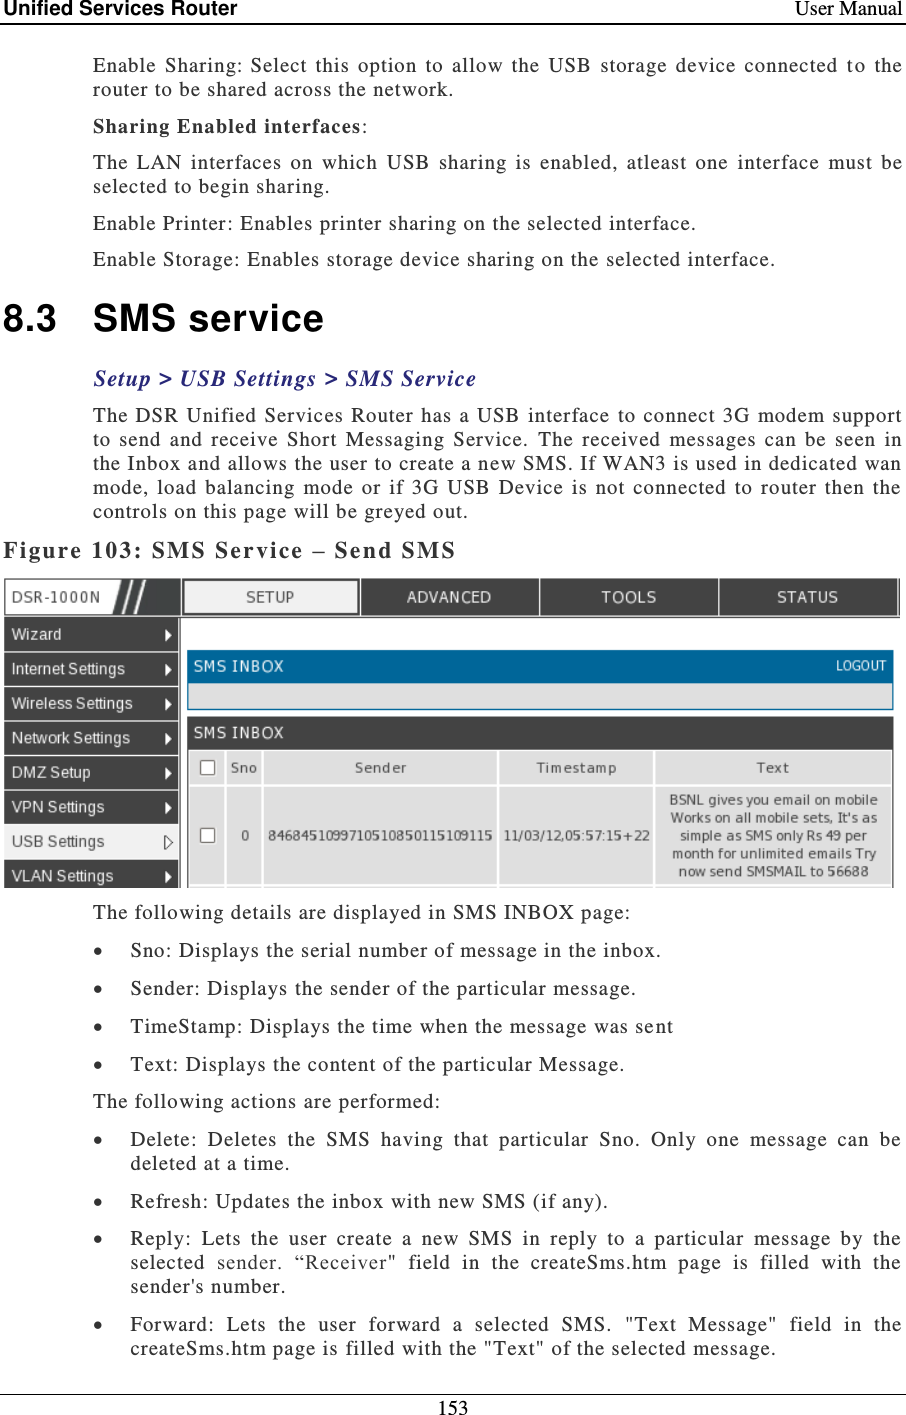 Unified Services Router    User Manual 153  Enable  Sharing: Select  this  option  to  allow  the  USB  storage  device  connected  t o  the router to be shared across the network.  Sharing Enabled interfaces: The  LAN  interfaces  on  which  USB  sharing  is  enabled,  atleast  one  interface  must  be selected to begin sharing. Enable Printer: Enables printer sharing on the selected interface.  Enable Storage: Enables storage device sharing on the selected interface. 8.3  SMS service Setup &gt; USB Settings &gt; SMS Service The DSR Unified Services Router has a USB interface  to connect  3G modem  support to  send  and  receive  Short  Messaging  Service.  The  received  messages  can  be  seen  in the Inbox and allows the user to create a new SMS. If WAN3 is used in dedicated wan mode,  load  balancing  mode  or  if  3G  USB  Device  is  not  connected  to  router  then  the controls on this page will be greyed out.  Figure 103: SMS Service – Send SMS   The following details are displayed in SMS INBOX page:    Sno: Displays the serial number of message in the inbox.   Sender: Displays the sender of the particular message.    TimeStamp: Displays the time when the message was se nt  Text: Displays the content of the particular Message.   The following actions are performed:  Delete:  Deletes  the  SMS  having  that  particular  Sno.  Only  one  message  can  be deleted at a time.   Refresh: Updates the inbox with new SMS (if any).   Reply:  Lets  the  user  create  a  new  SMS  in  reply  to  a  particular  message  by  the selected  sender.  “Receiver&quot;  field  in  the  createSms.htm  page  is  filled  with  the sender&apos;s number.  Forward:  Lets  the  user  forward  a  selected  SMS.  &quot;Text  Message&quot;  field  in  the createSms.htm page is filled with the &quot;Text&quot; of the selected message.  